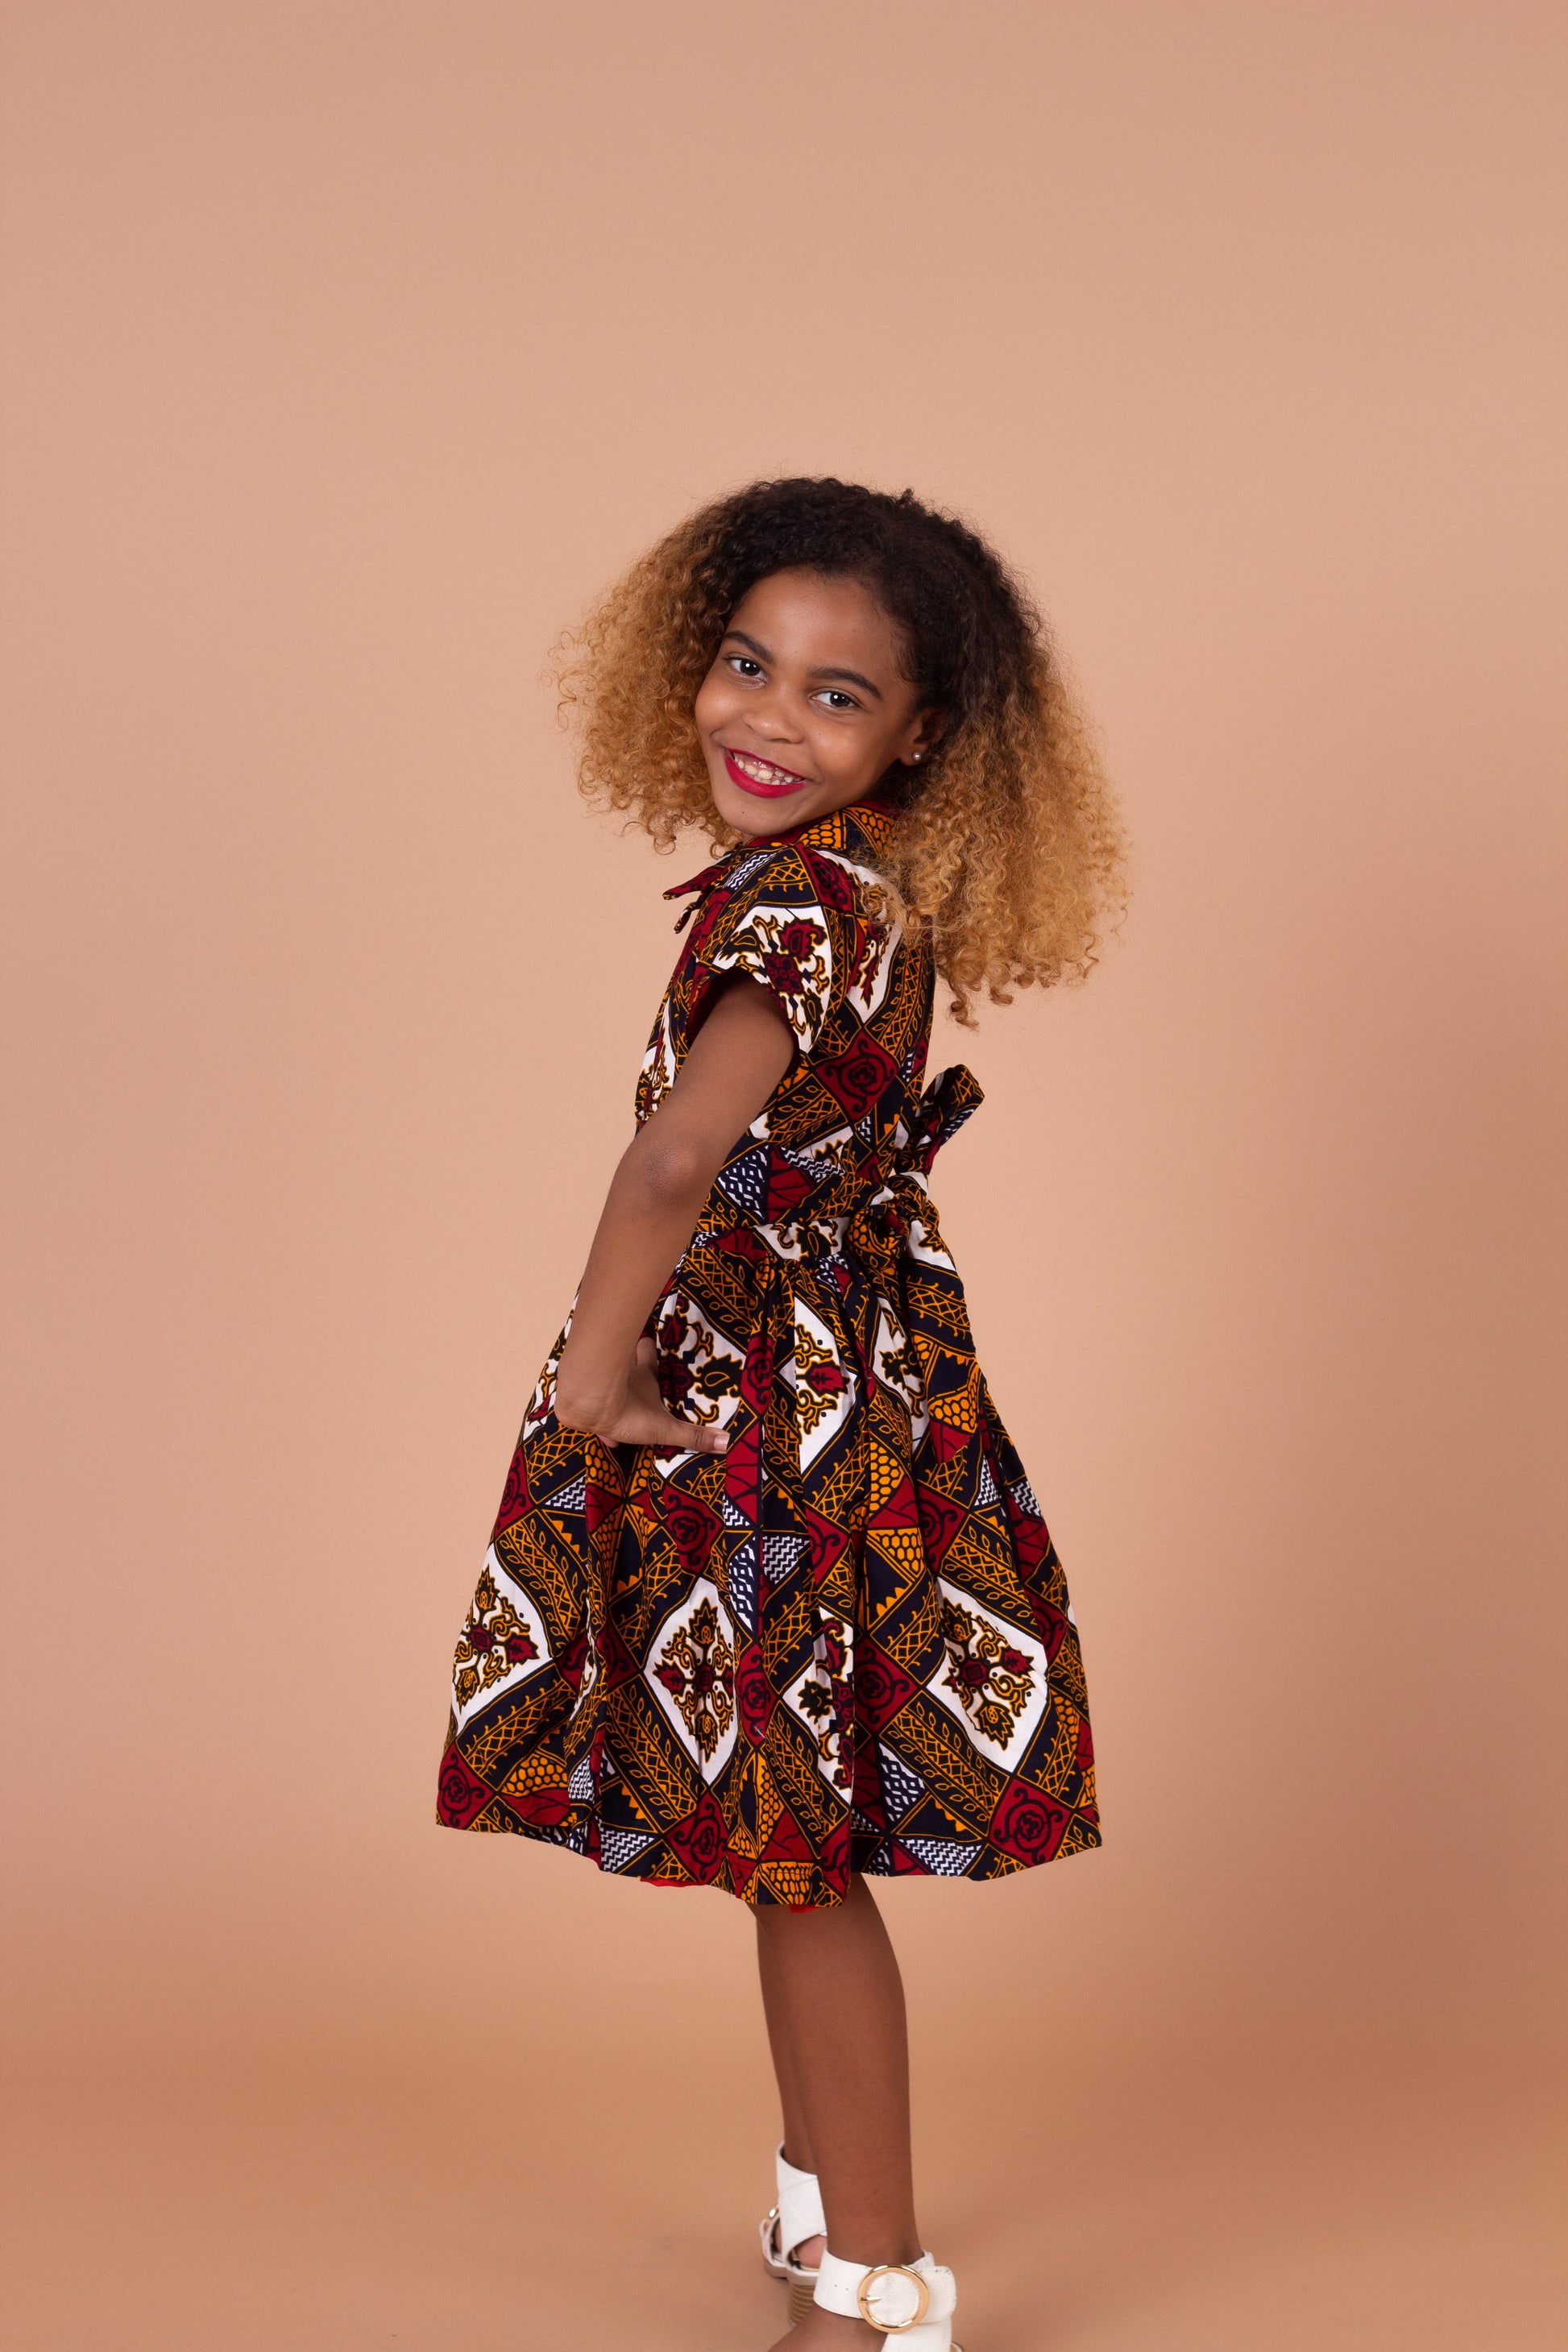  Ankara wax printed Knee length flared belted  dress with short sleeves and collared neckline in Red, yellow, white and black Squared African medallion pattern.